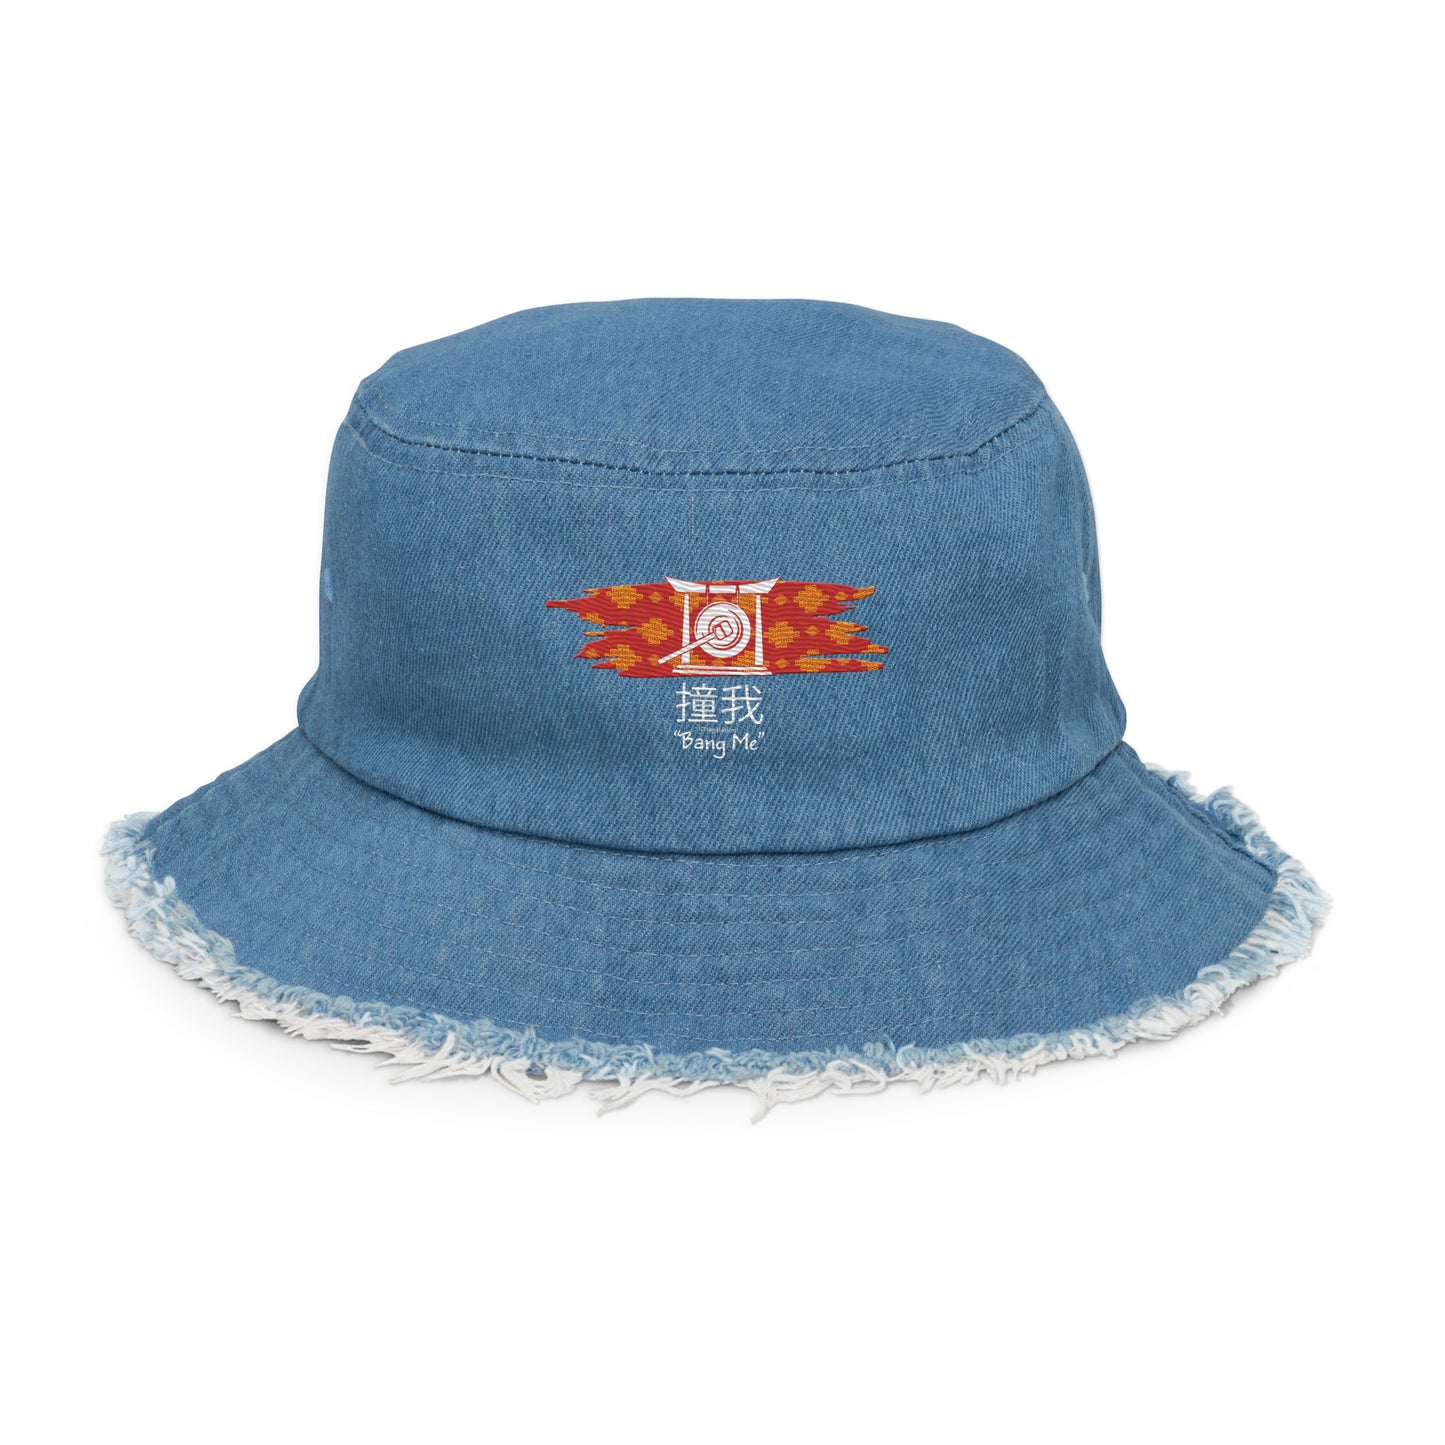 Bang Me Embroidered Bucket Hat